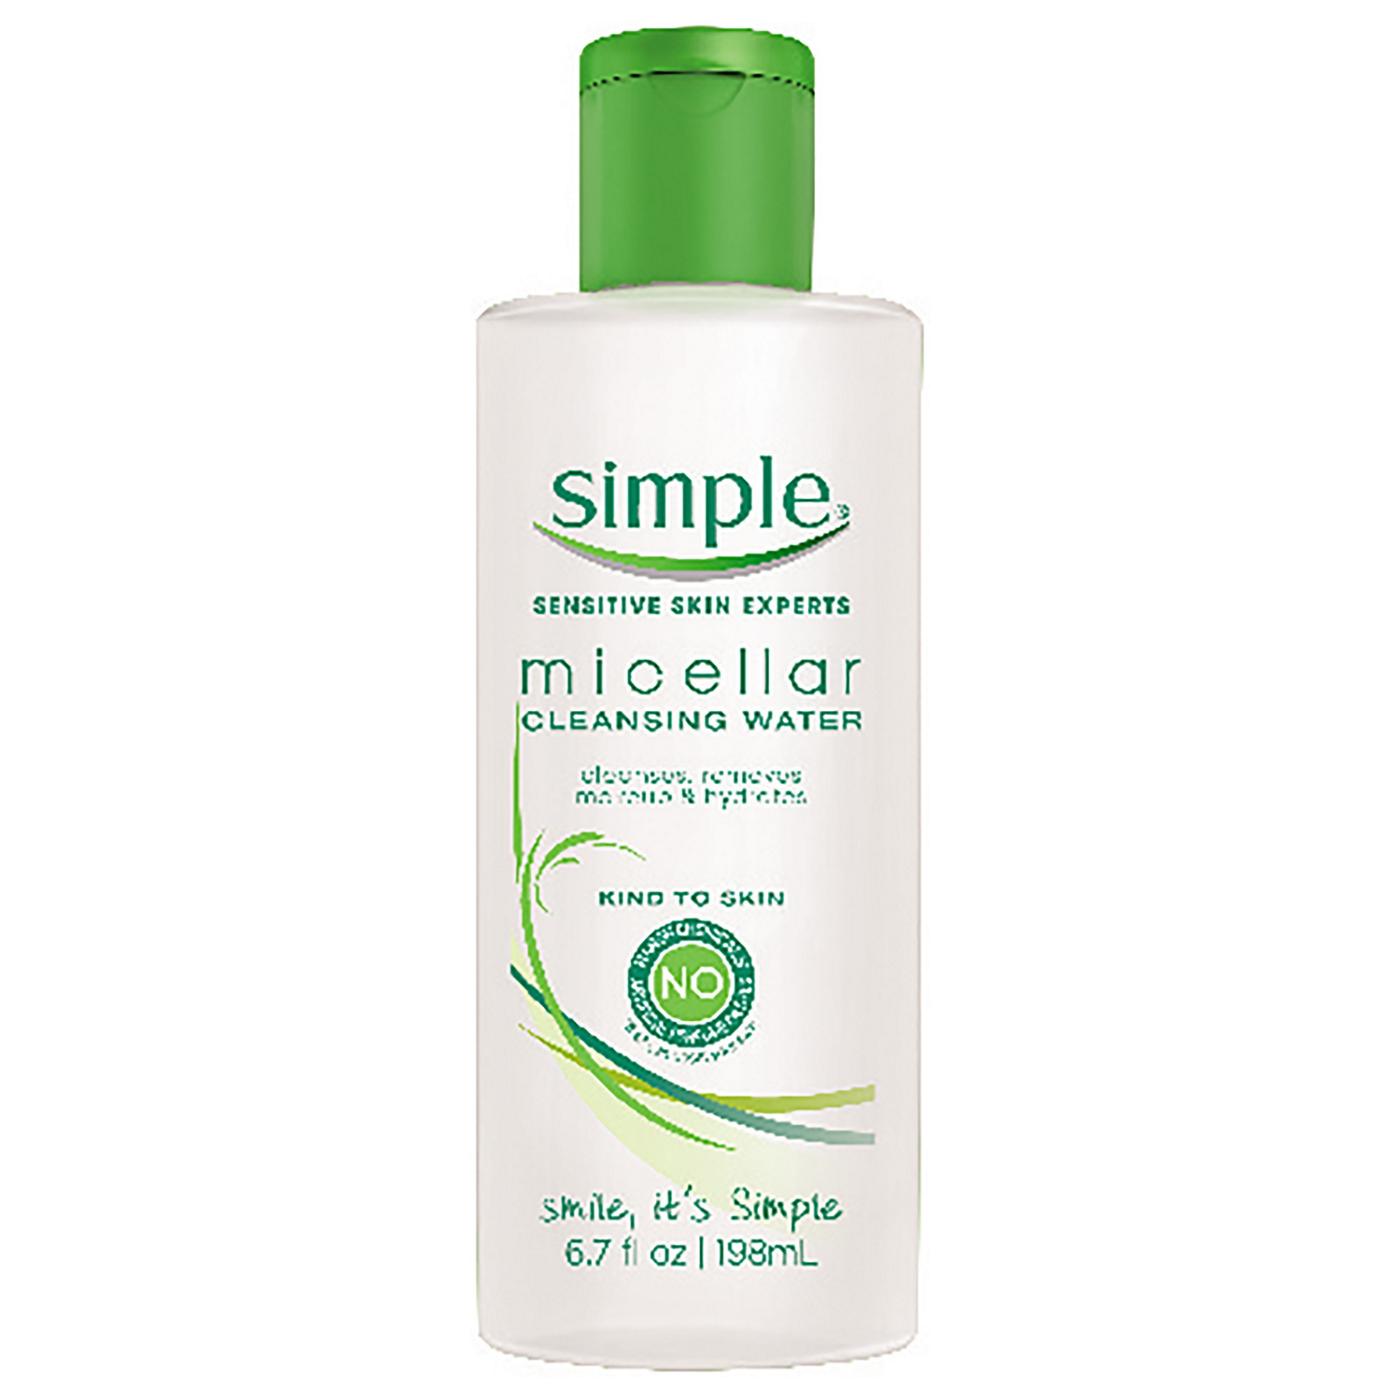 Simple Kind to Skin Micellar Cleansing Water; image 1 of 3